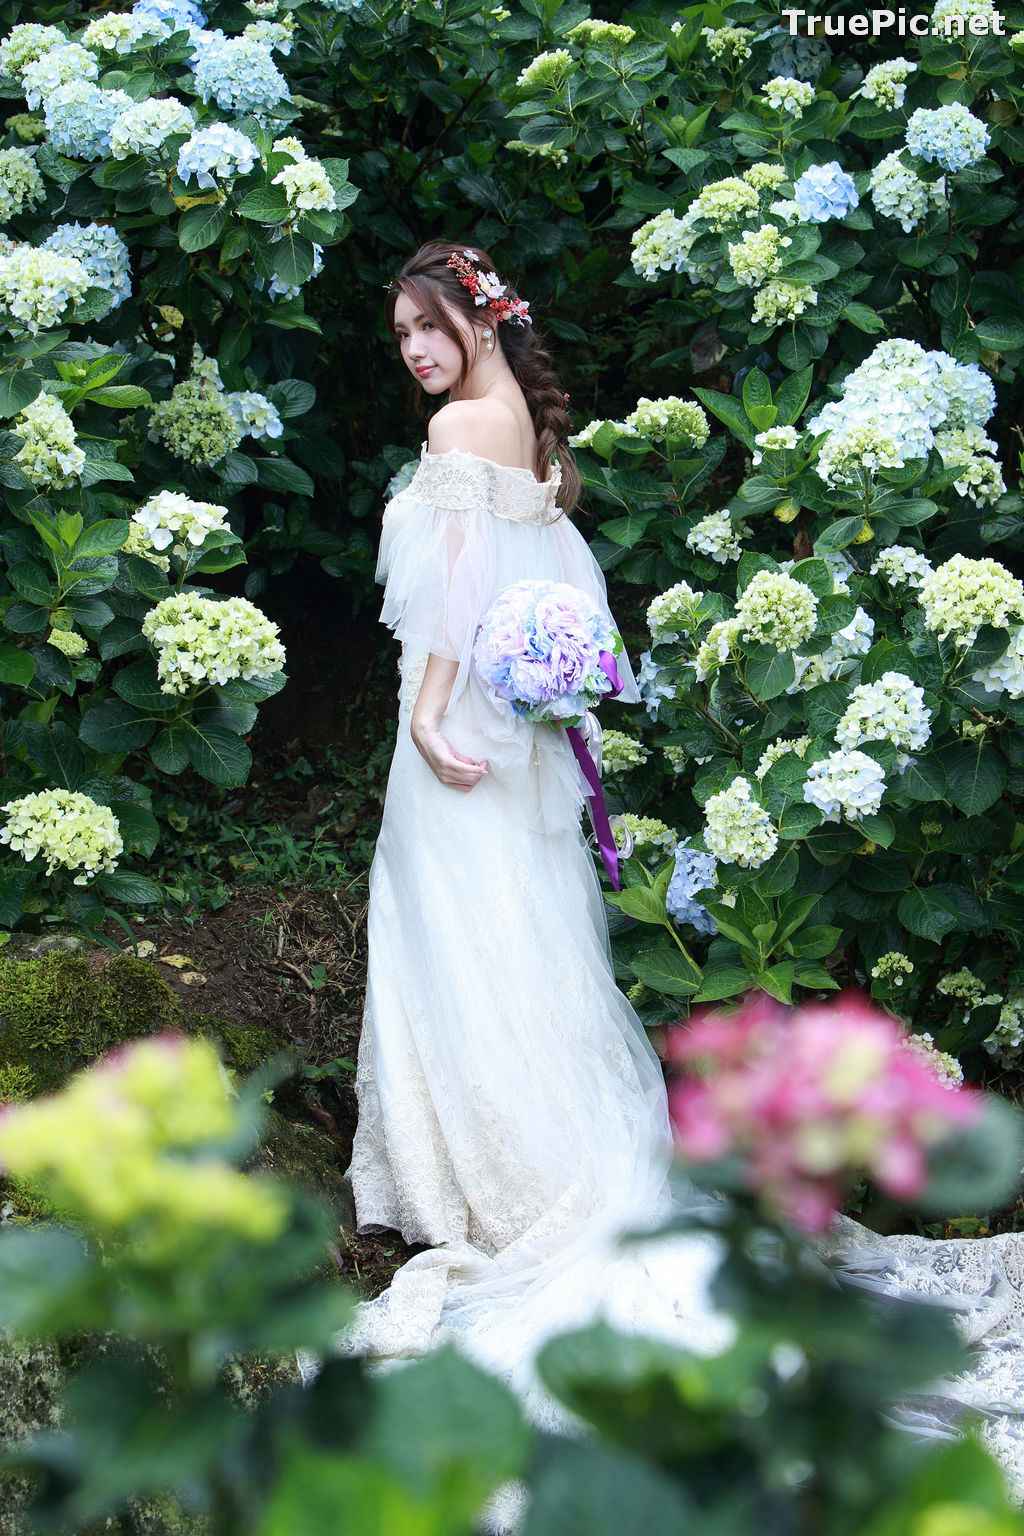 Image Taiwanese Model - 張倫甄 - Beautiful Bride and Hydrangea Flowers - TruePic.net - Picture-21